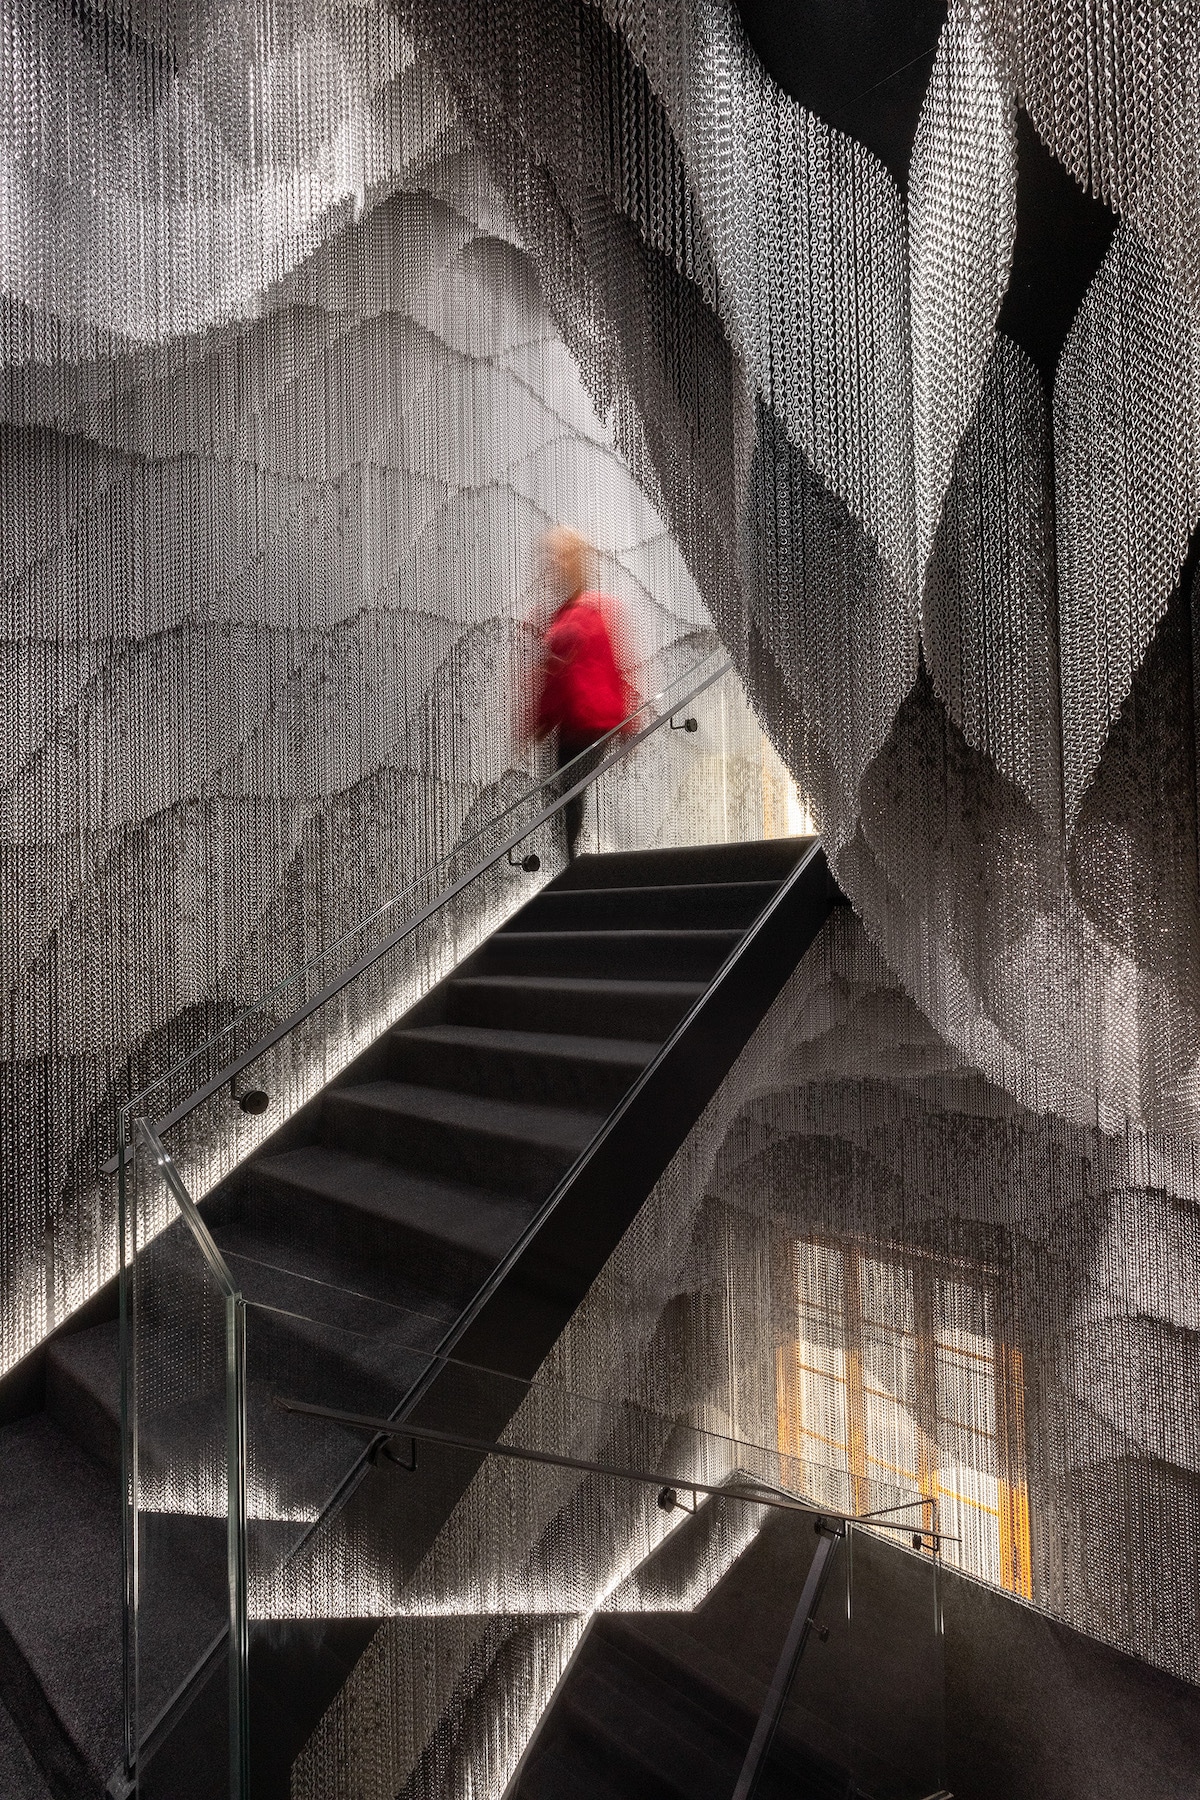 Person Passing Inside Kengo Kuma Aluminum Chain Staircase in Gaudí’s Casa Batlló, Captured by Jordi Anguera